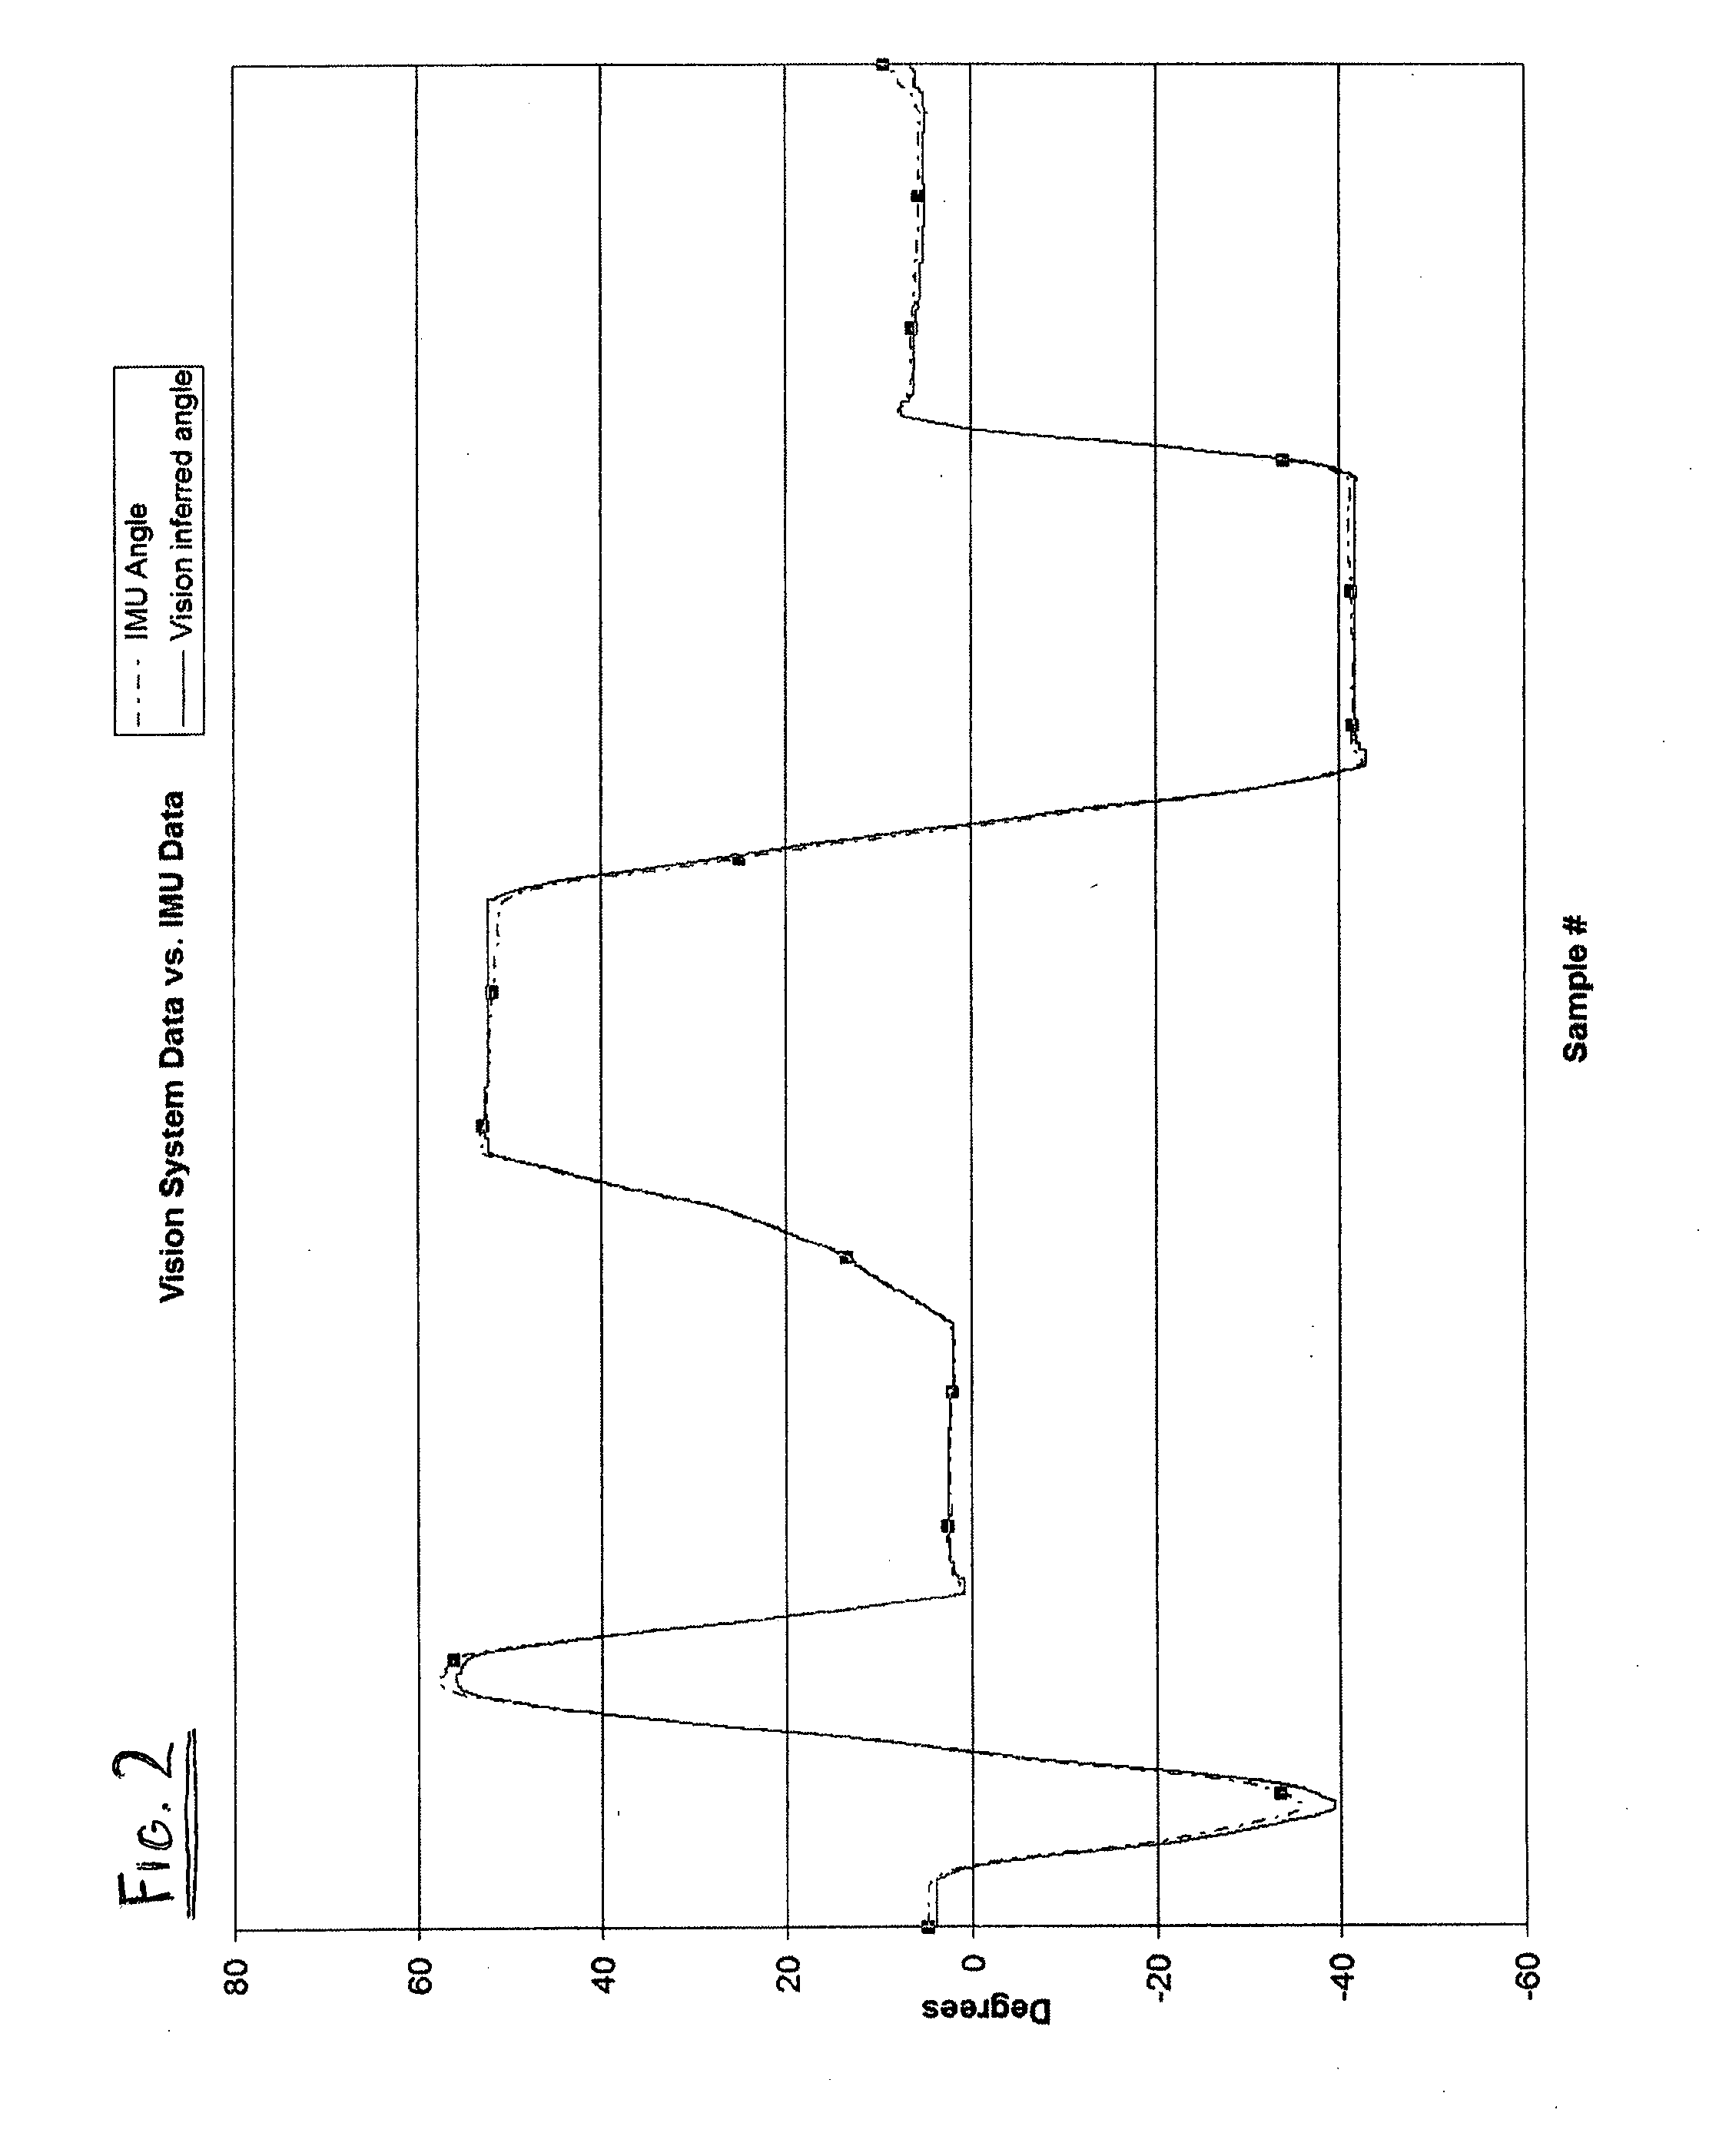 System for facilitating control of an aircraft